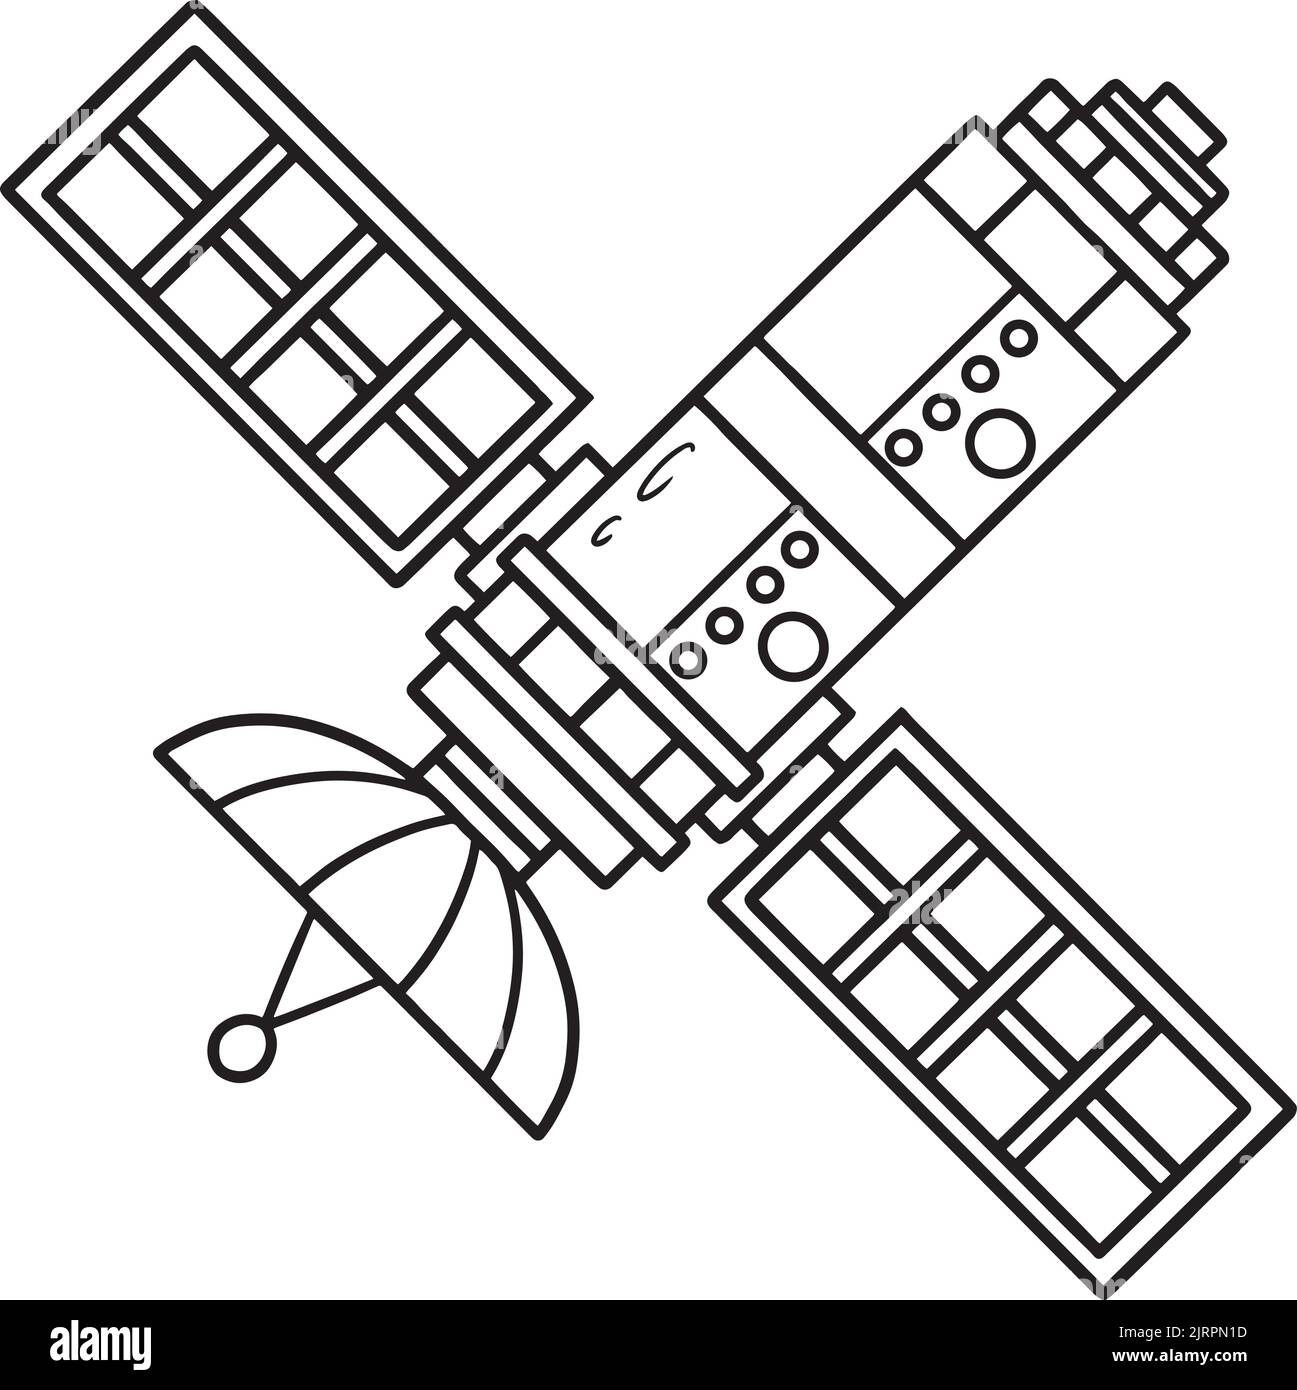 Space Satellite Isolated Coloring Page für Kinder Stock Vektor